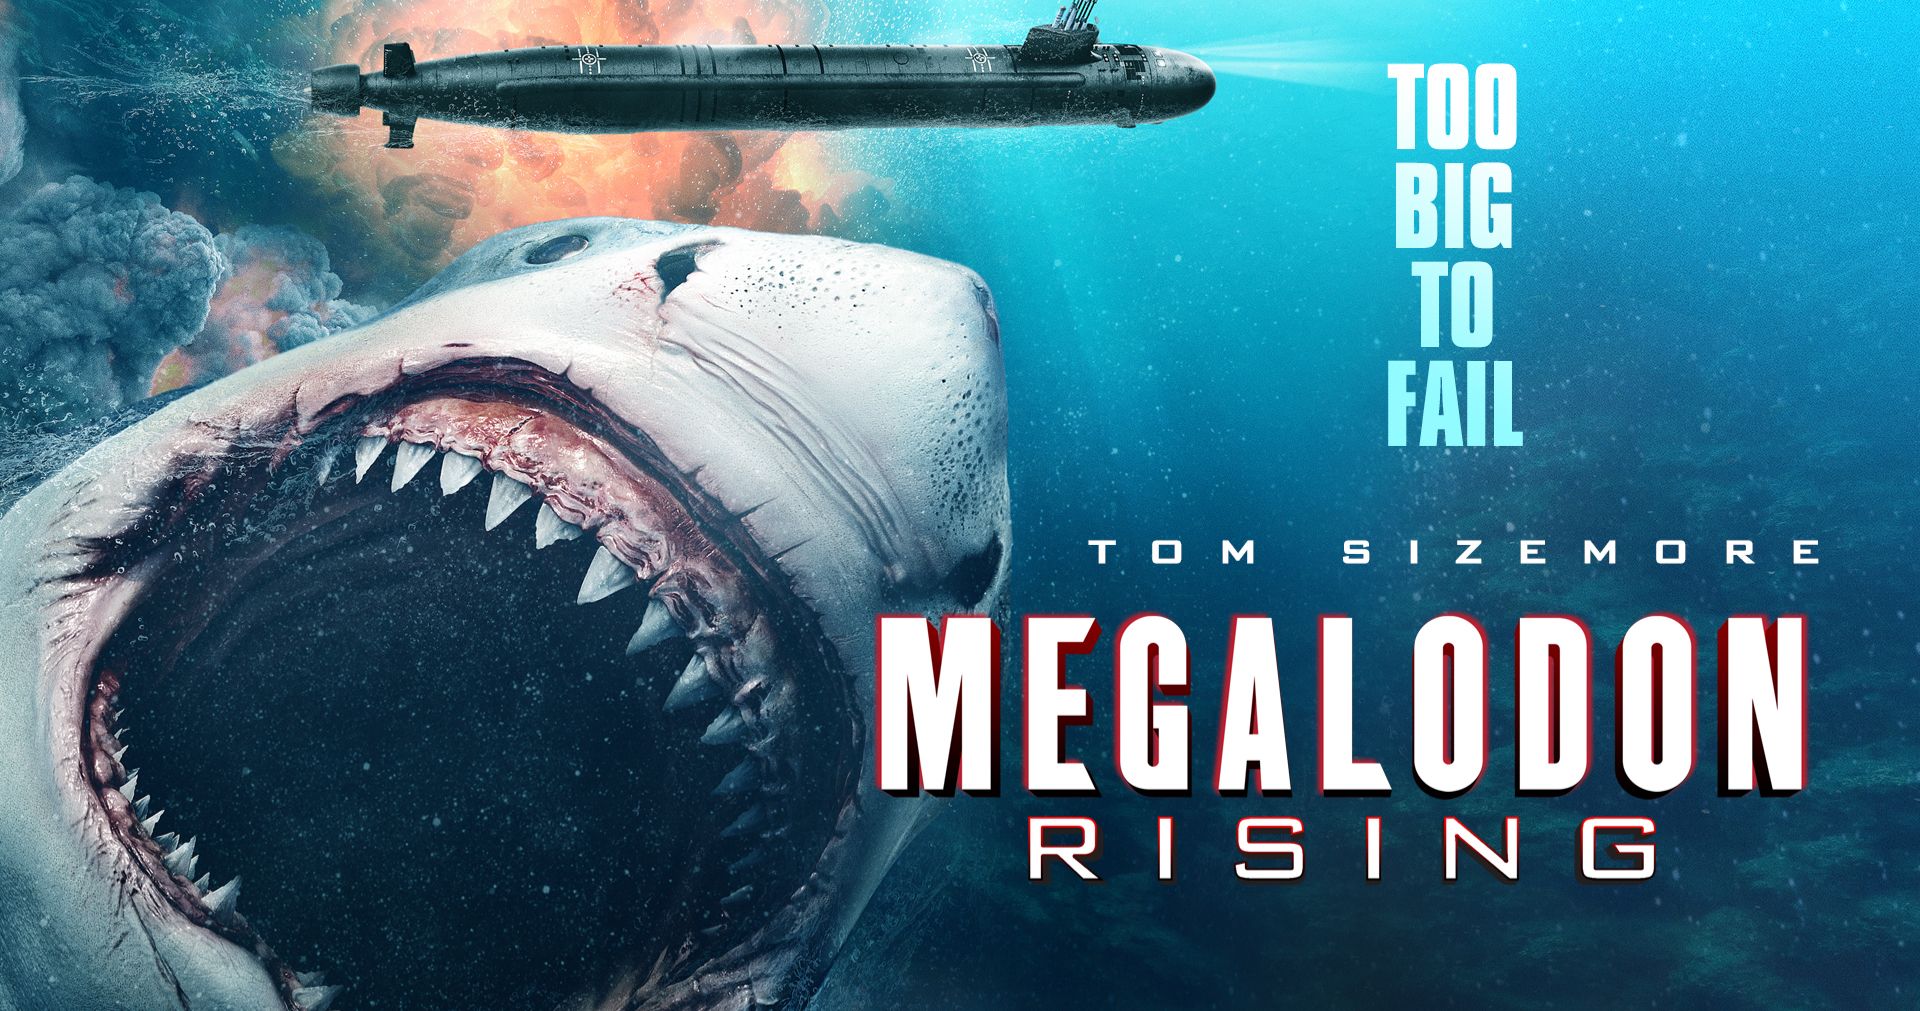 Megalodon Rising Trailer Has Tom Sizemore at War with the World's Biggest Shark